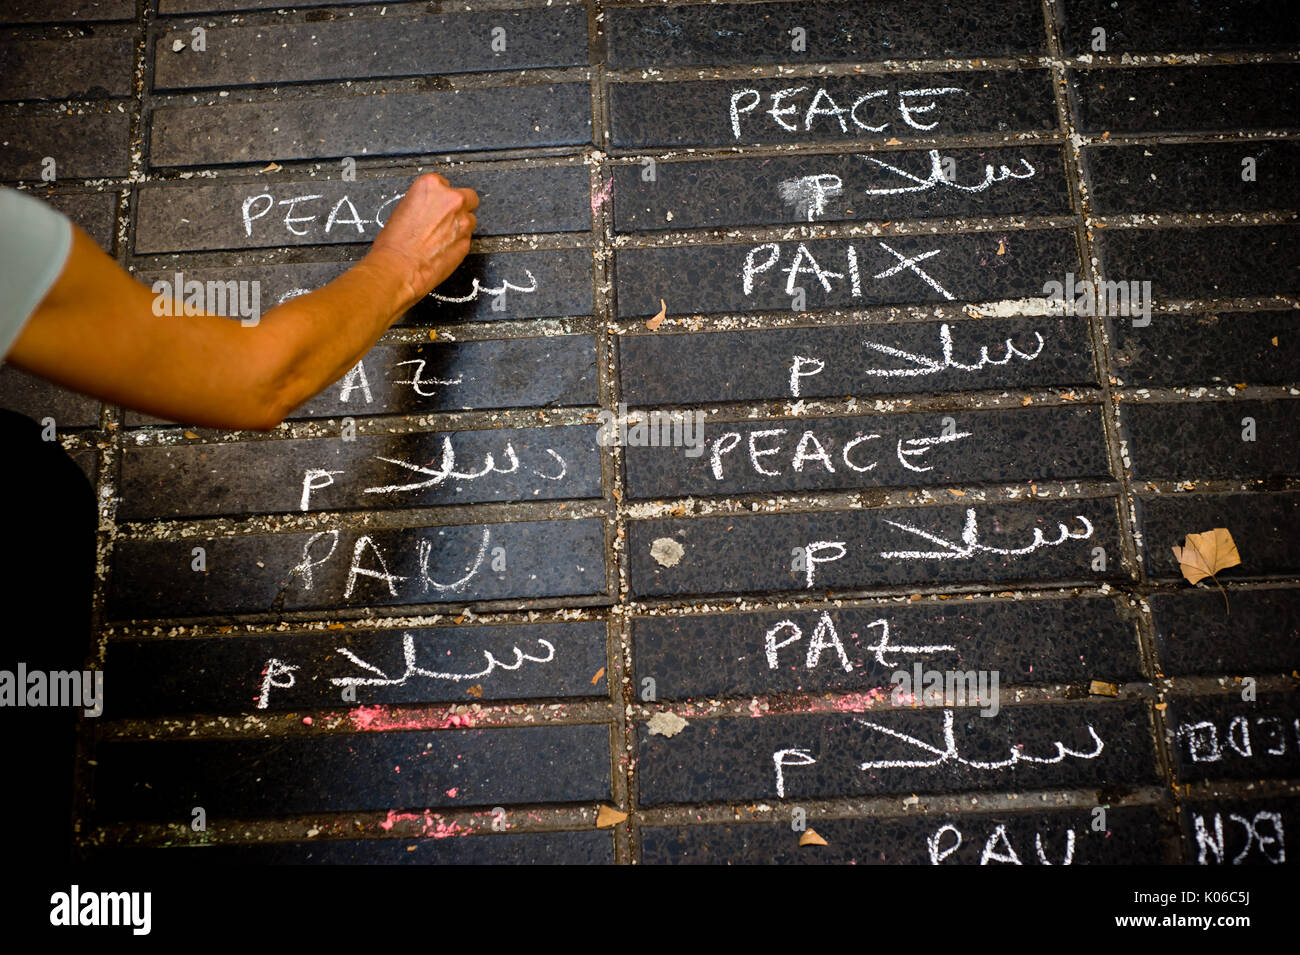 Barcelona, Catalonia, Spain. 21st Aug, 2017. A woman writtes in several languages the word 'peace' on the floor of Las Ramblas in Barcelona the same day that Younes Abouyaaqoub, identified as driver of van that sped down Las Ramblas on Thursday, has been shot dead by Catalan police officers in the village of Subirats. Credit: Jordi Boixareu/ZUMA Wire/Alamy Live News Stock Photo